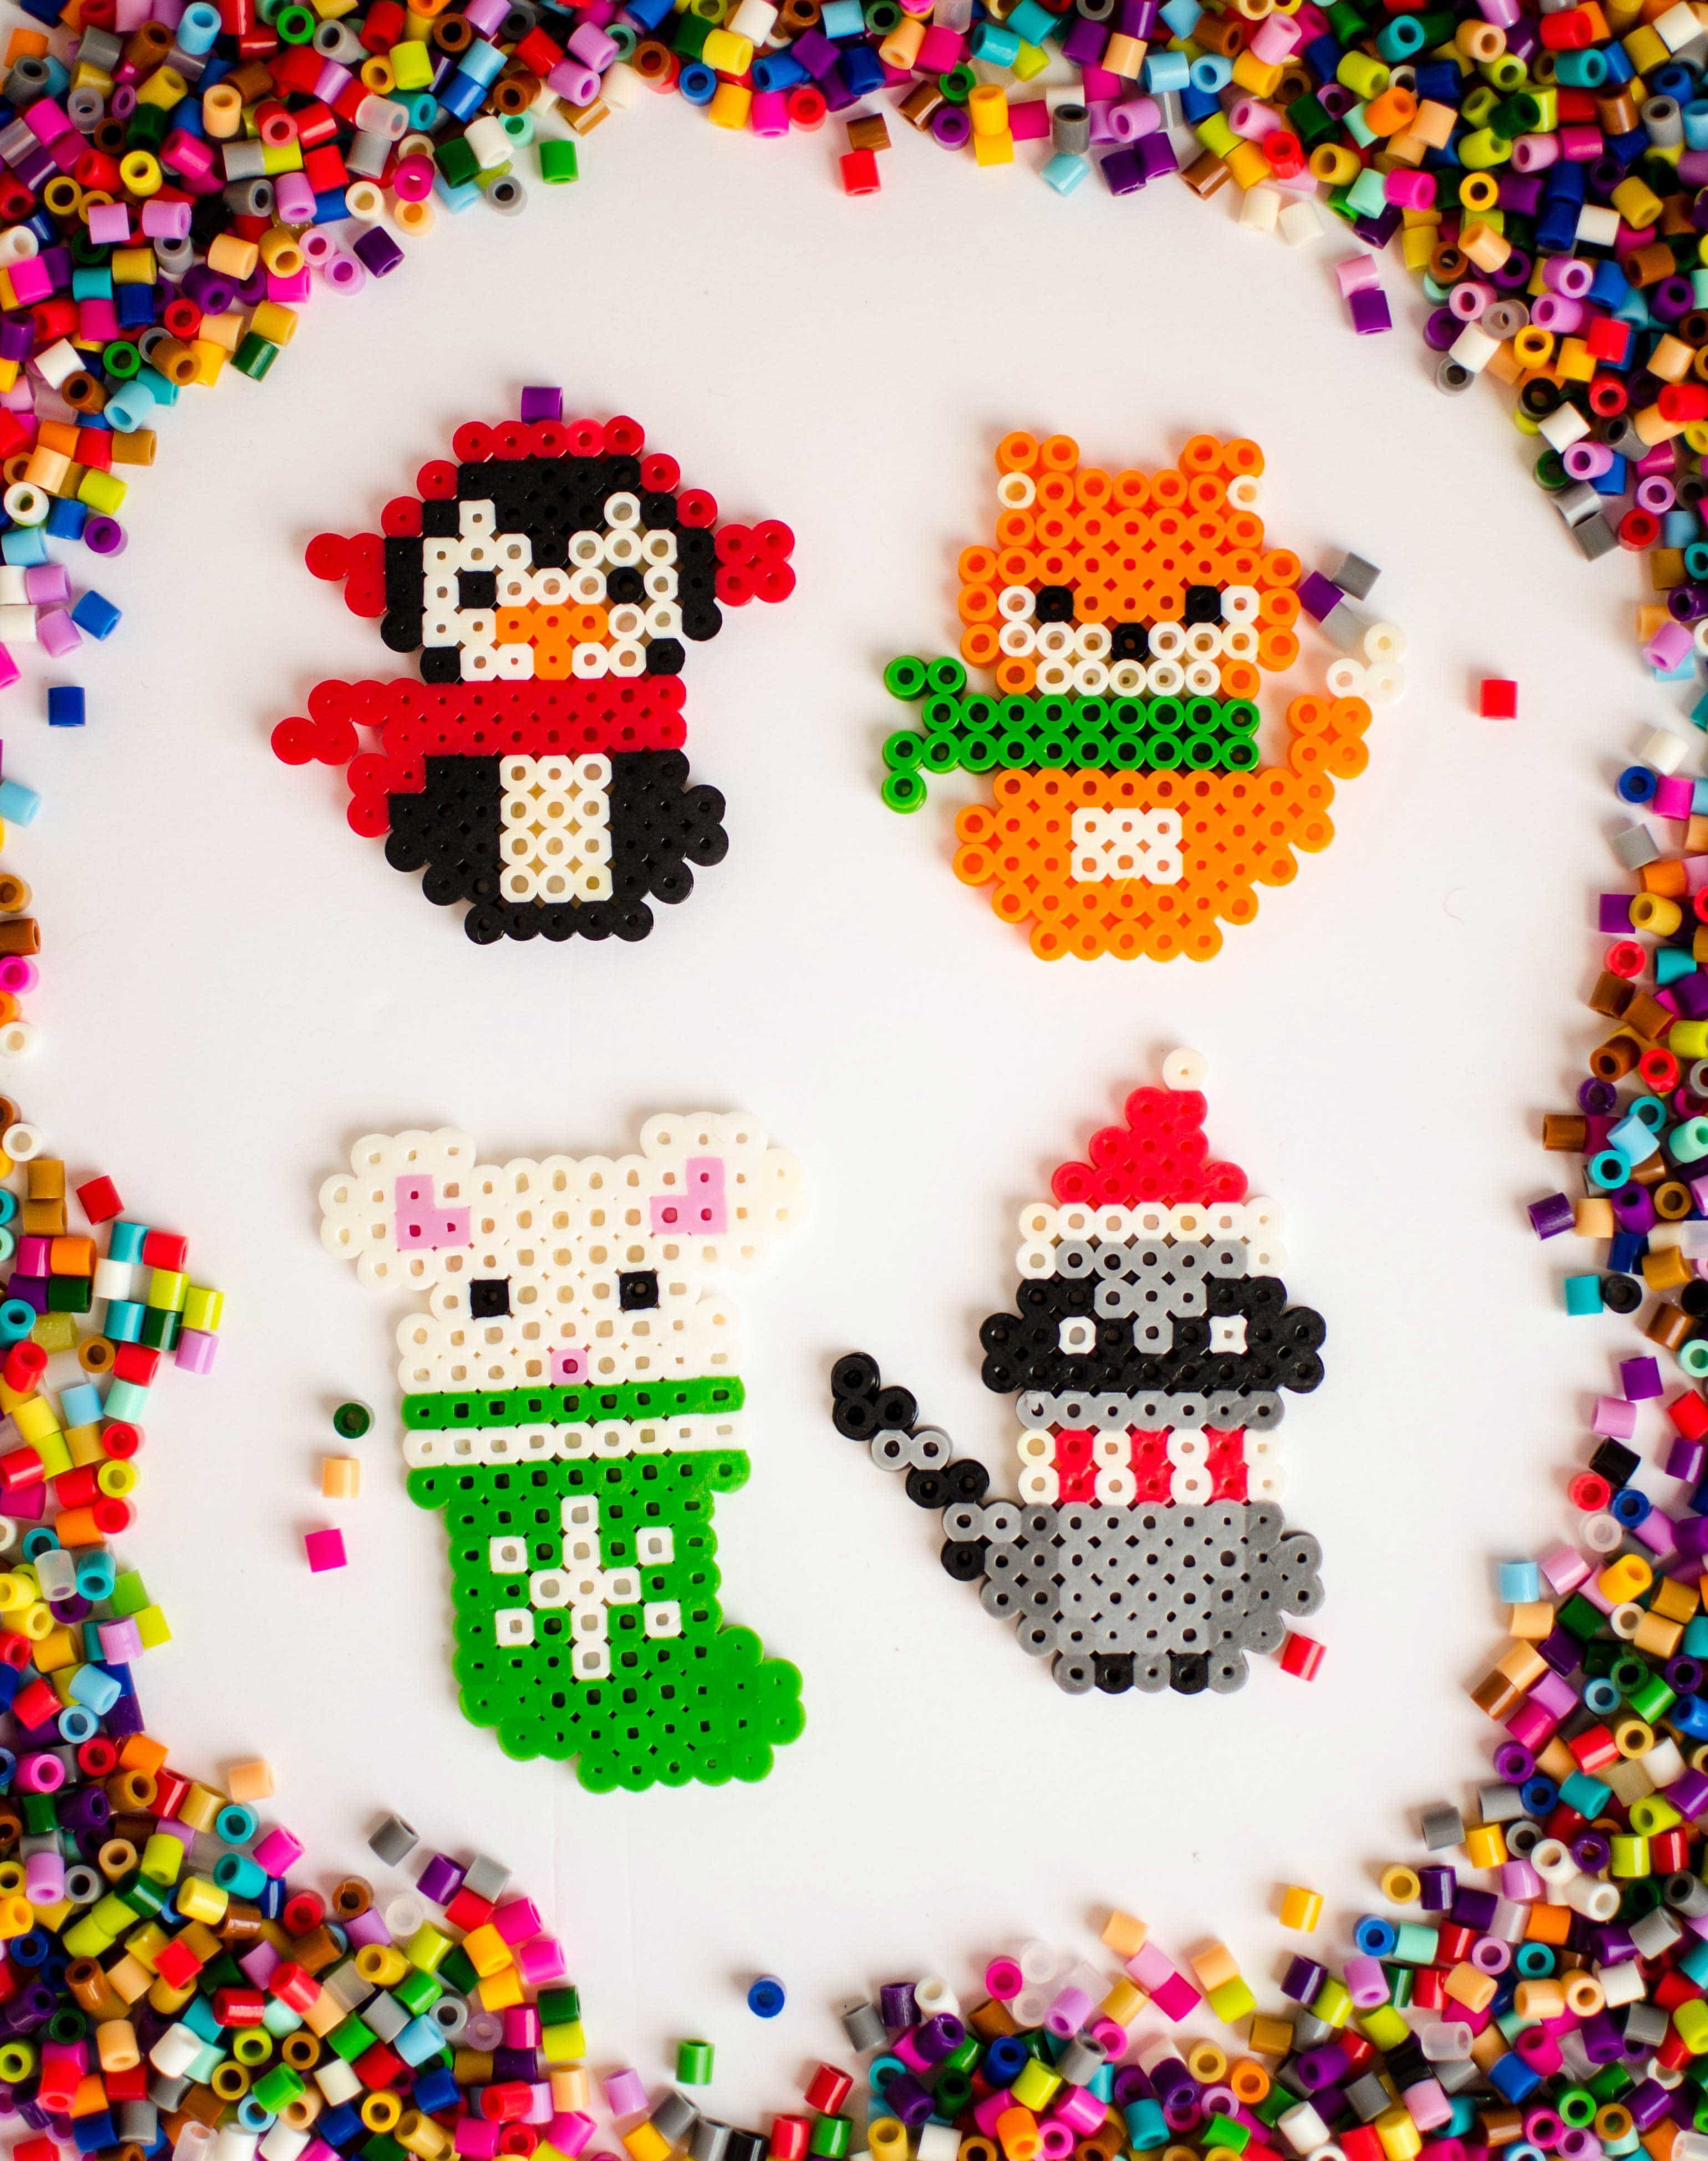 Make these adorable melty bead Christmas ornaments with the free printable patterns available to download. These are so fun to make and are a great kids Christmas craft idea. #ChristmasKidsCraft #MeltyBeads #DIYChristmas